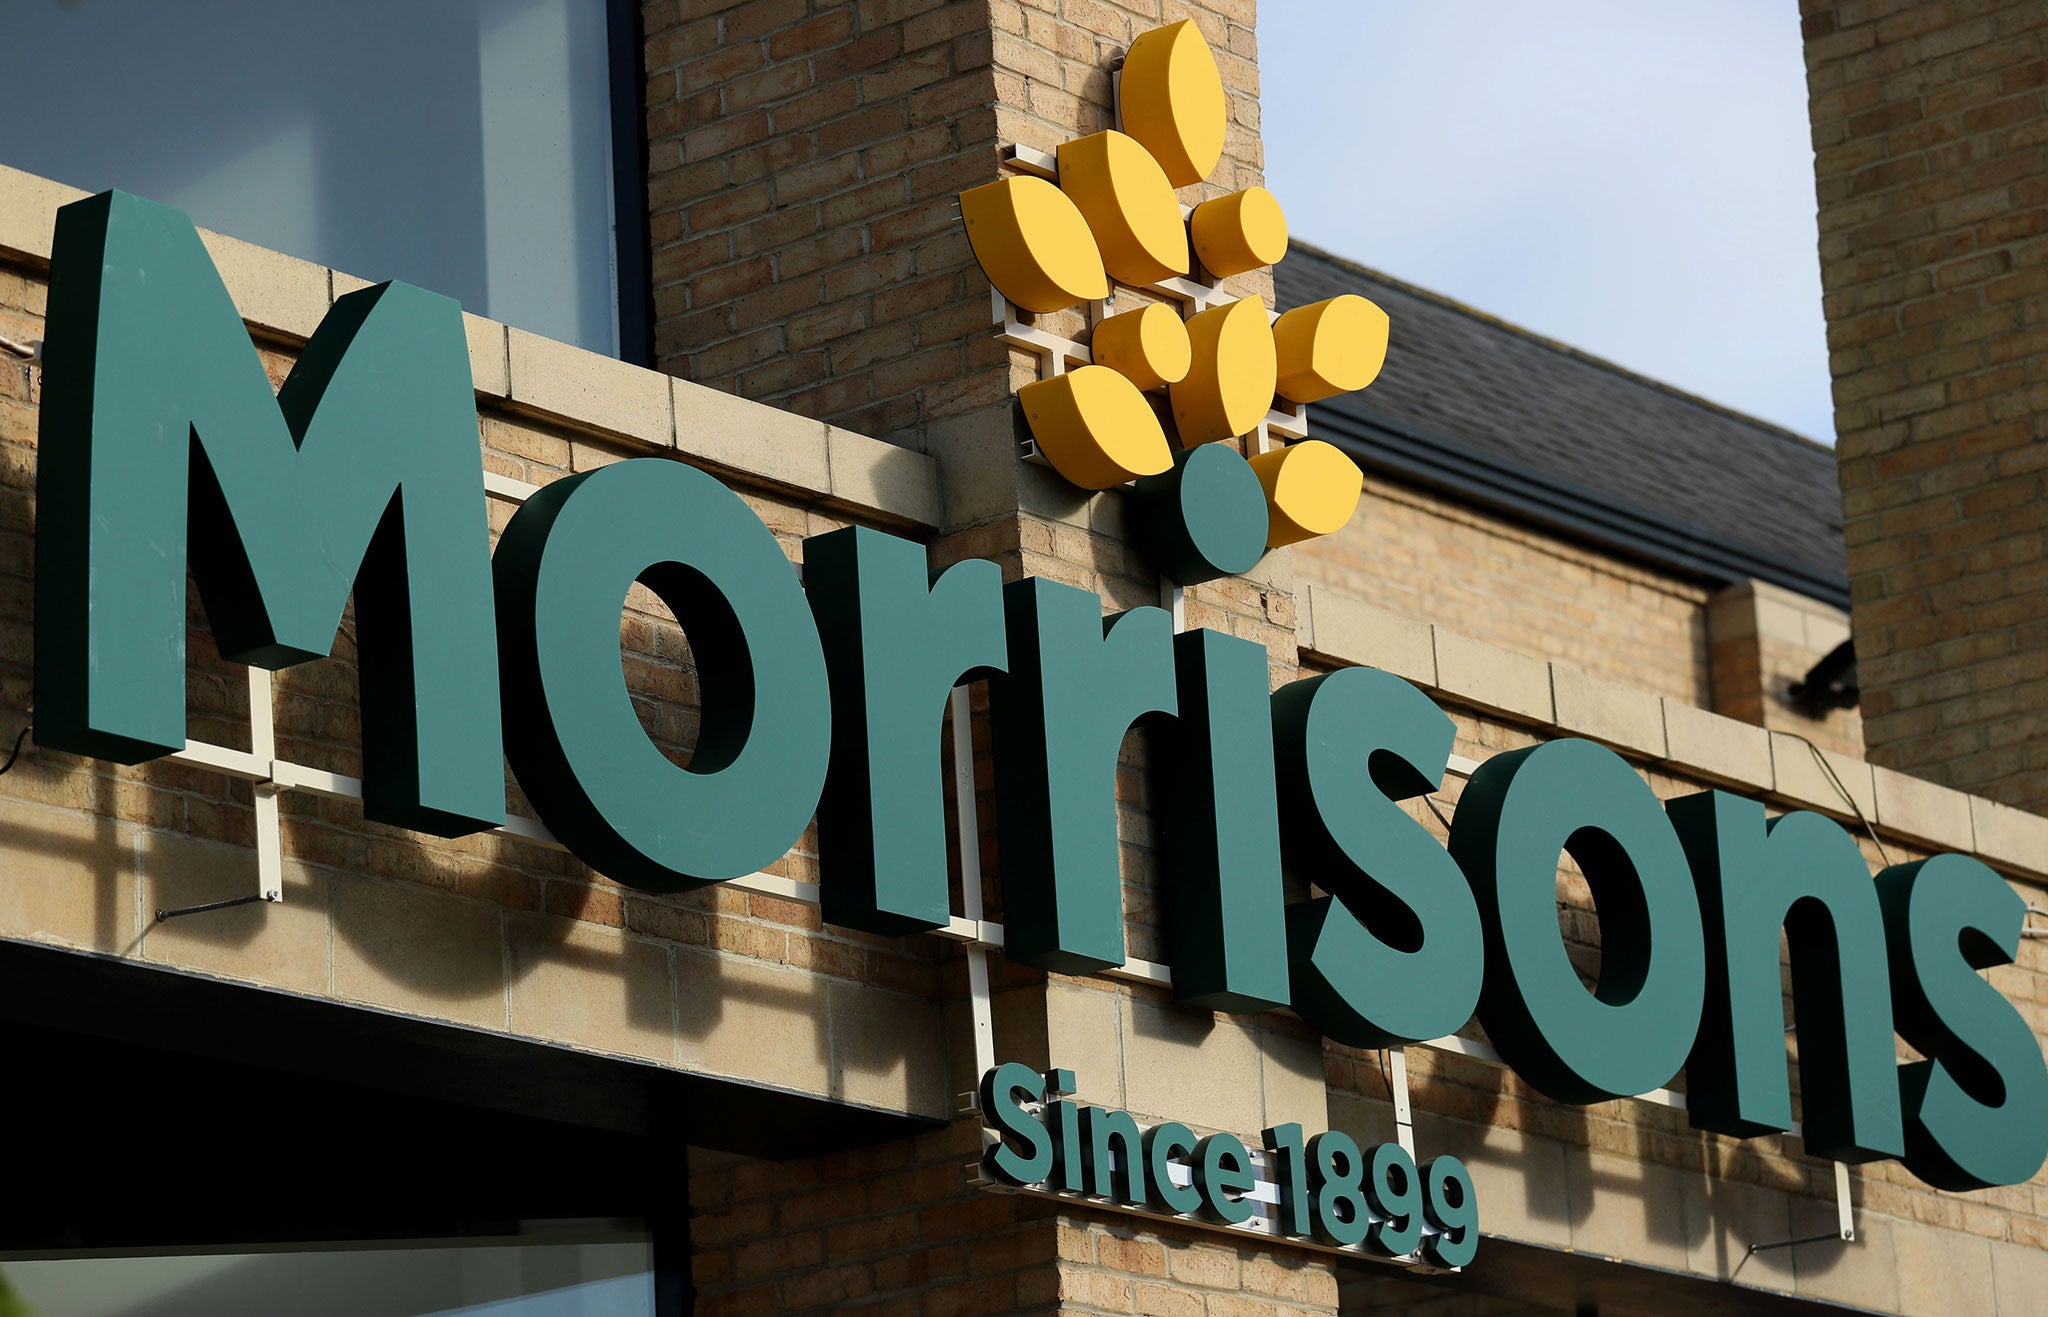 Morrisons’s own strategy is bearing fruit, with its wholesale business on track to reach £700m in sales this year